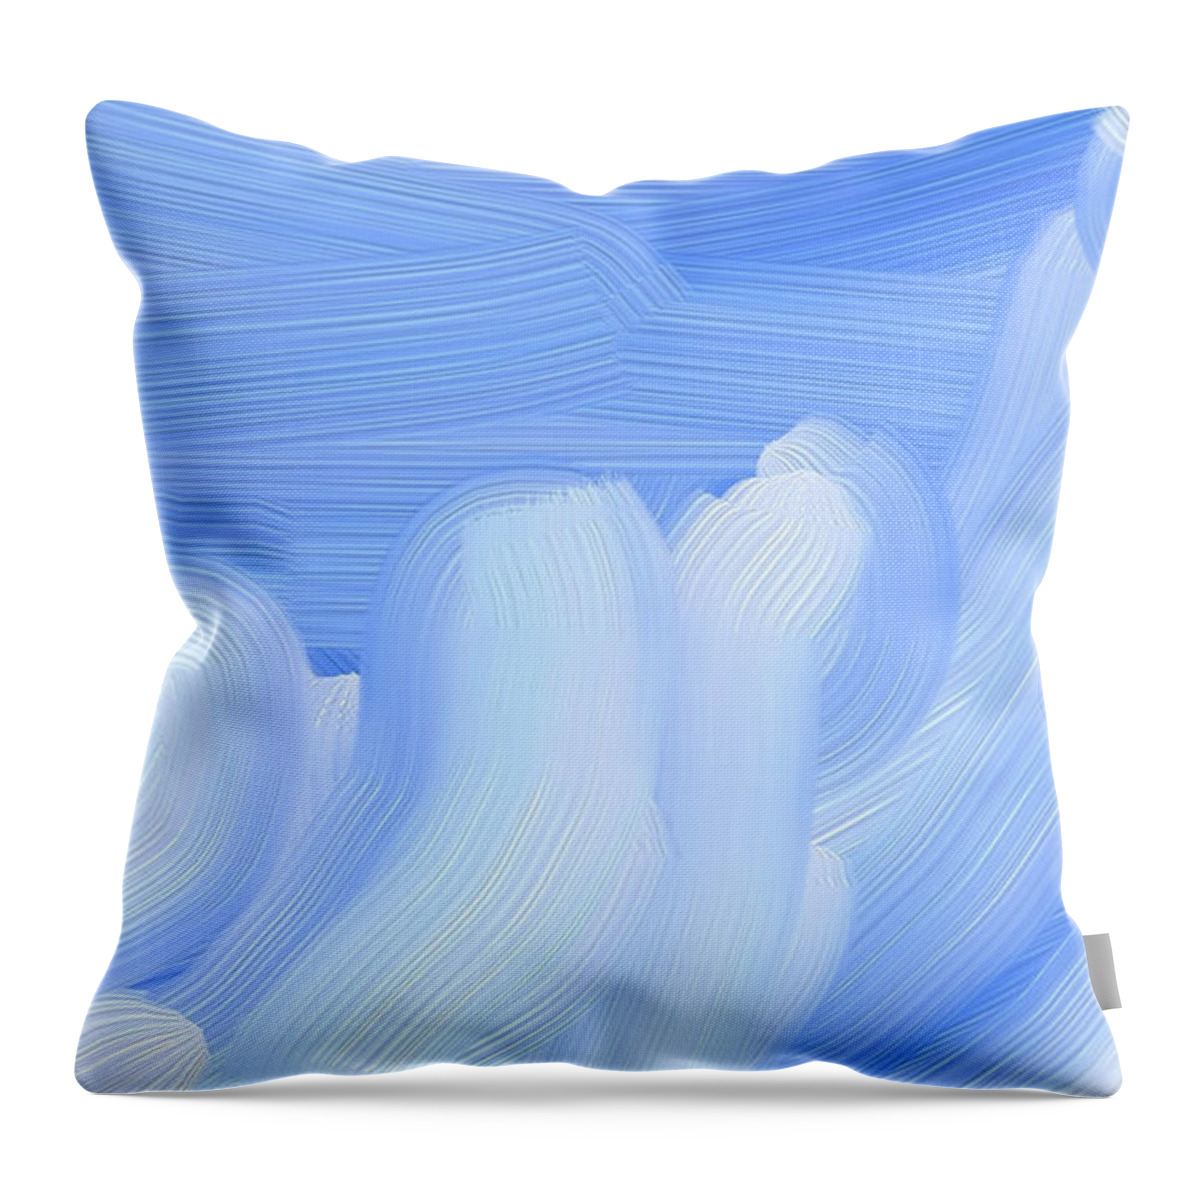 Peaceful Throw Pillow featuring the painting Snowscape by Naomi Jacobs